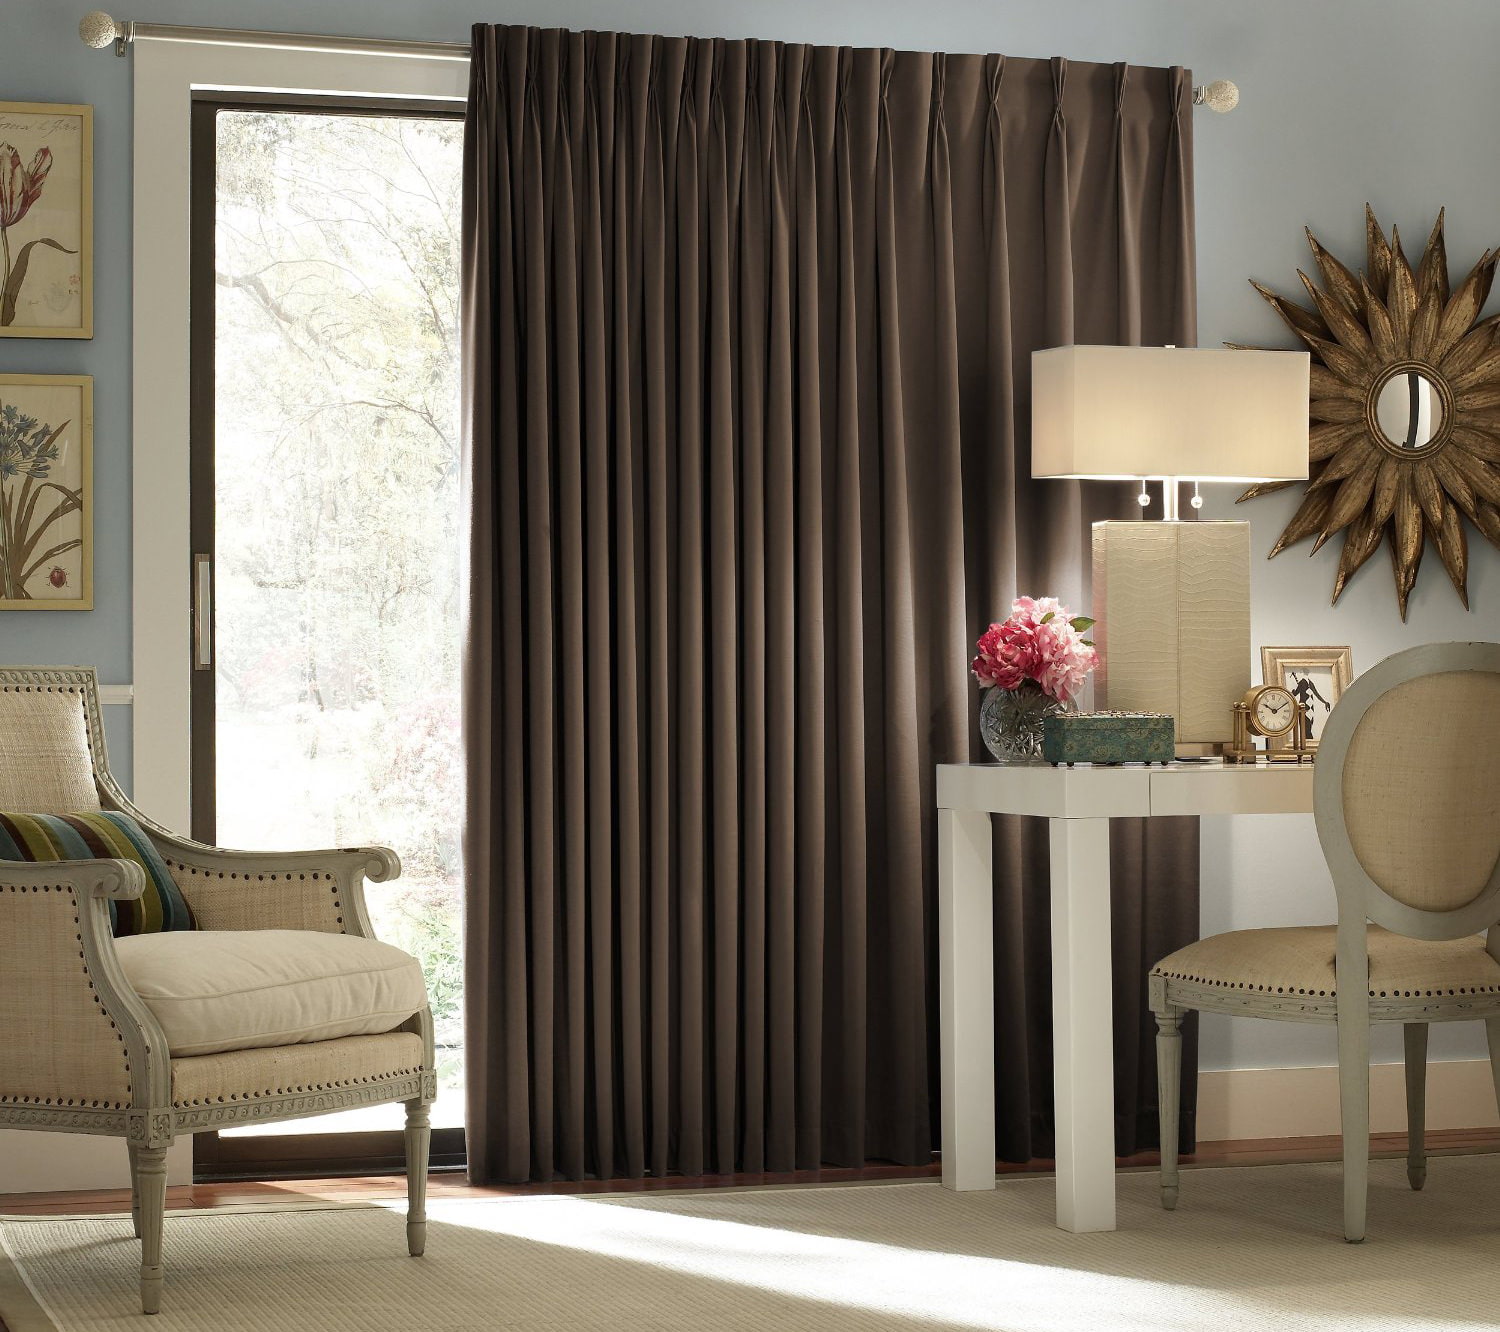 fabric consumption for curtains